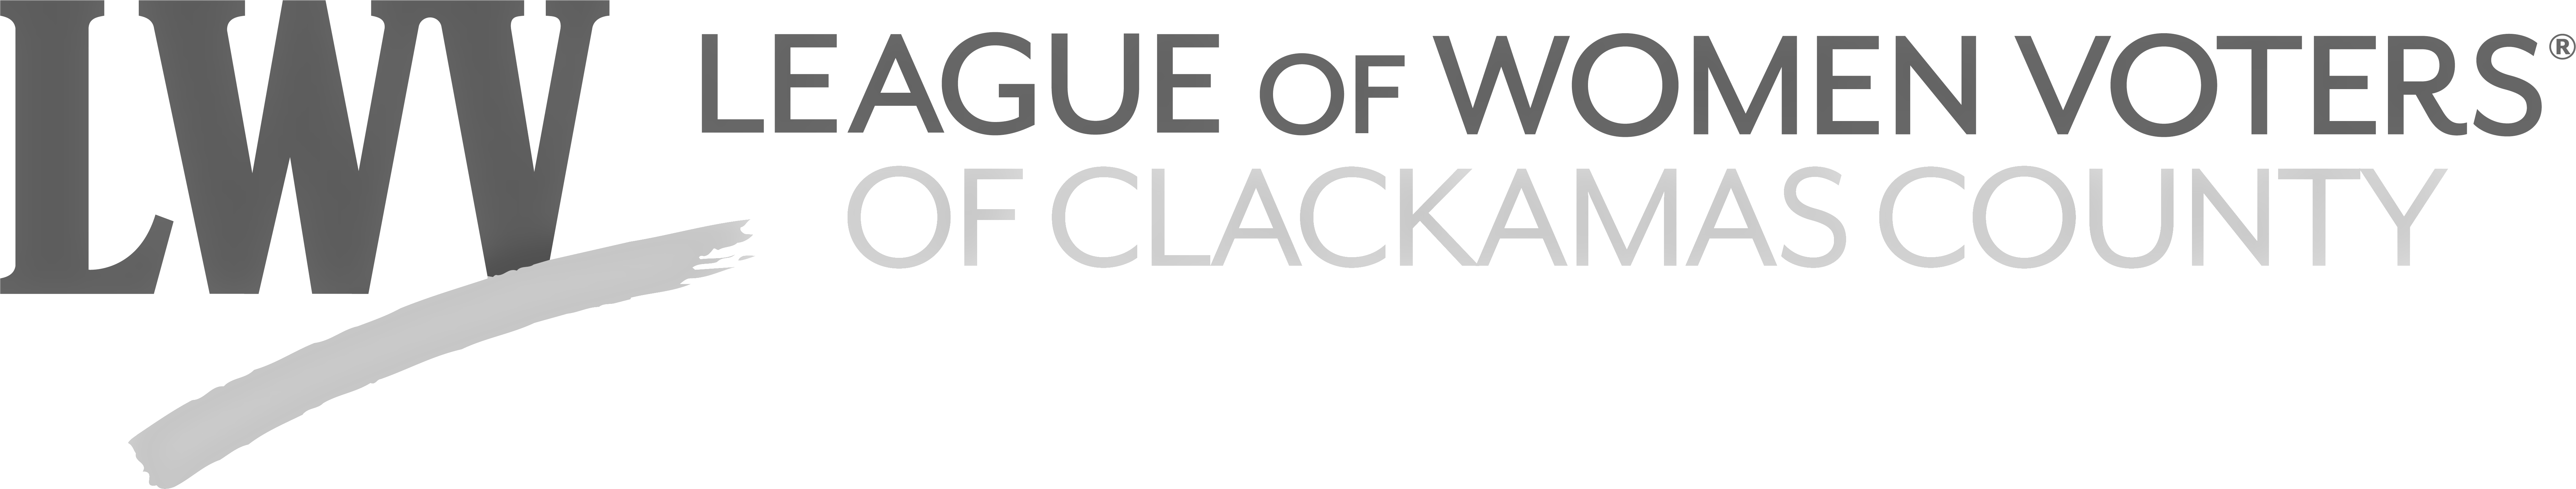 League of Women Voters of Clackamas County banner